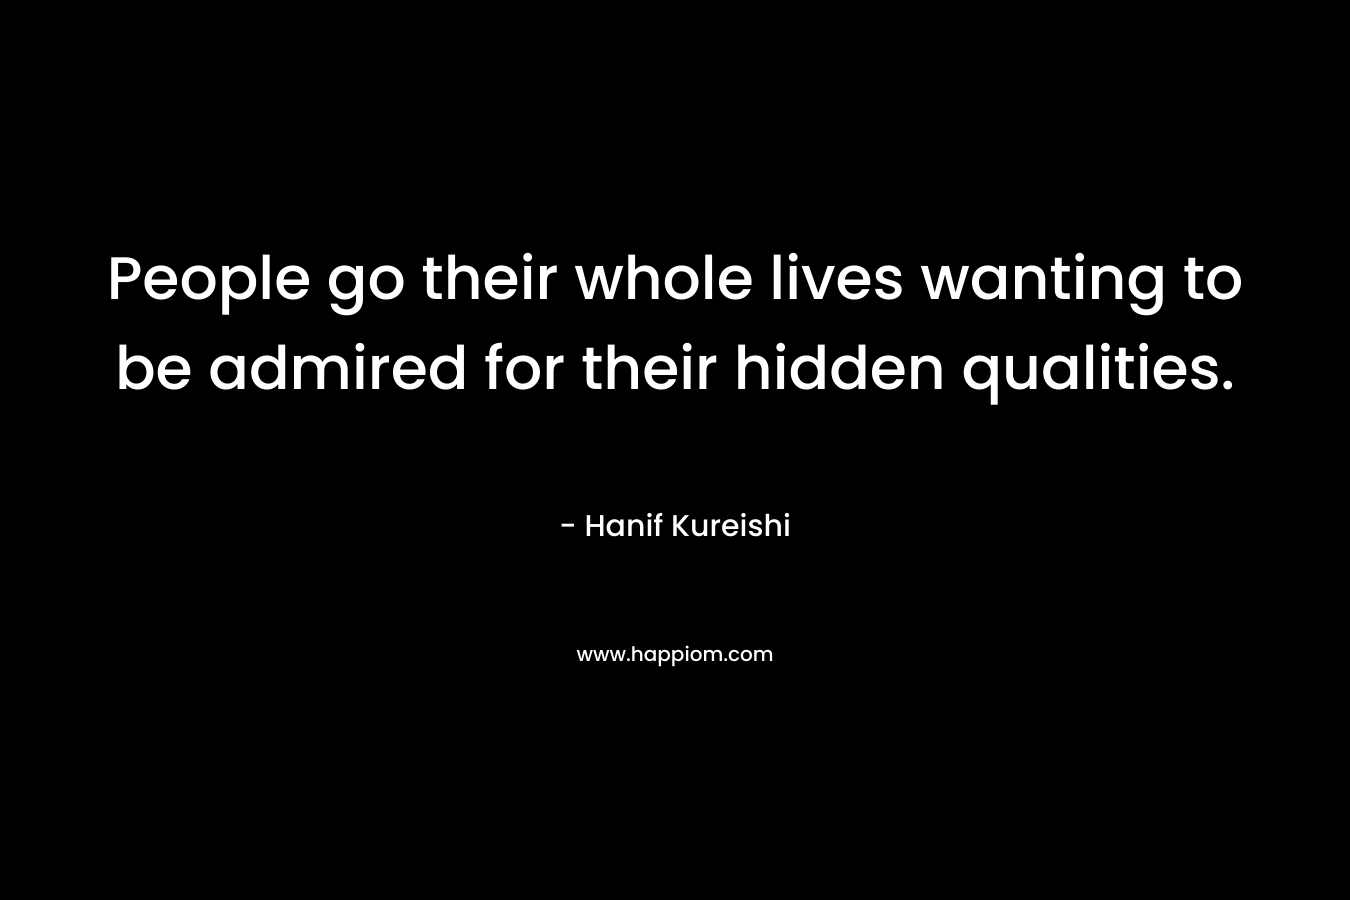 People go their whole lives wanting to be admired for their hidden qualities. – Hanif Kureishi